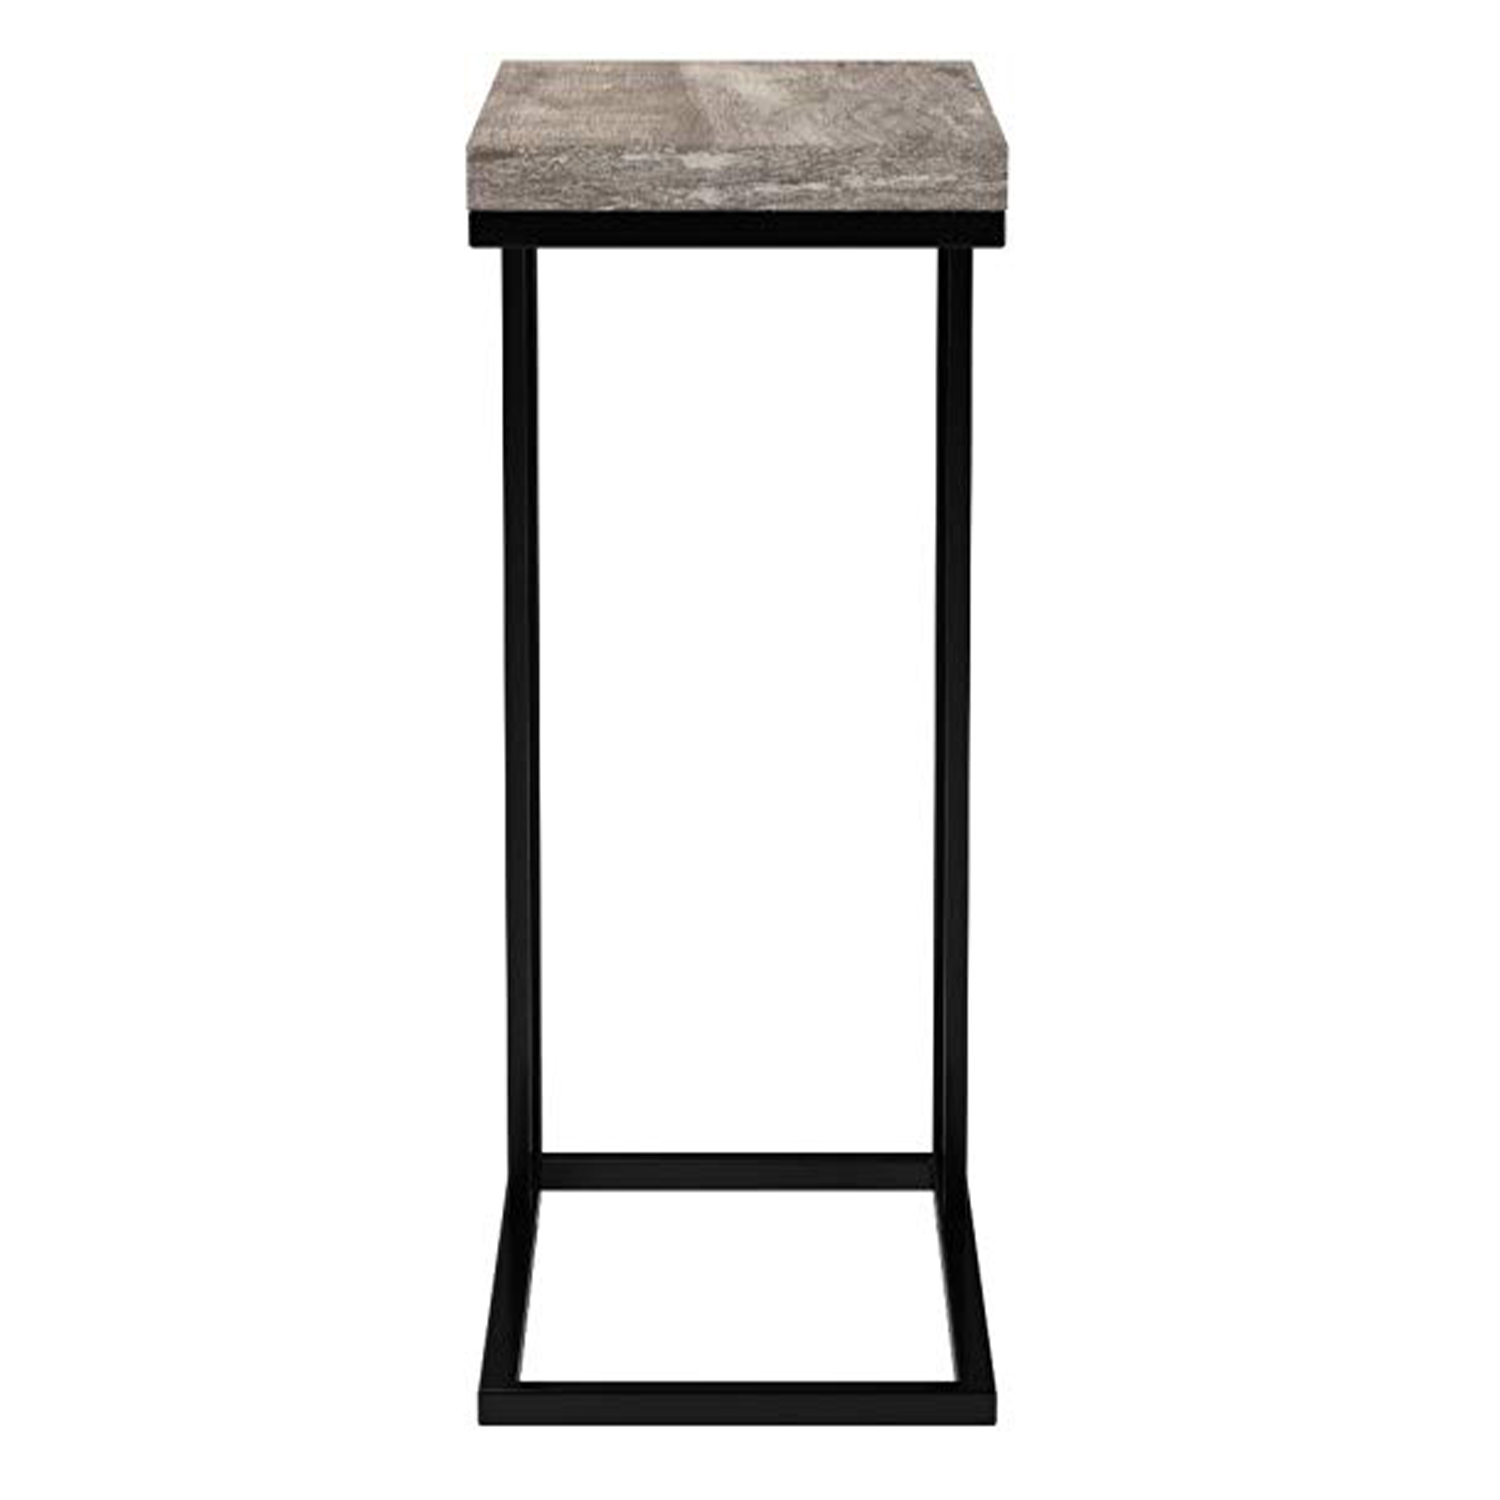 18.25" x 10.25" x 25.25" TaupeBlack Particle Board Metal Accent Table